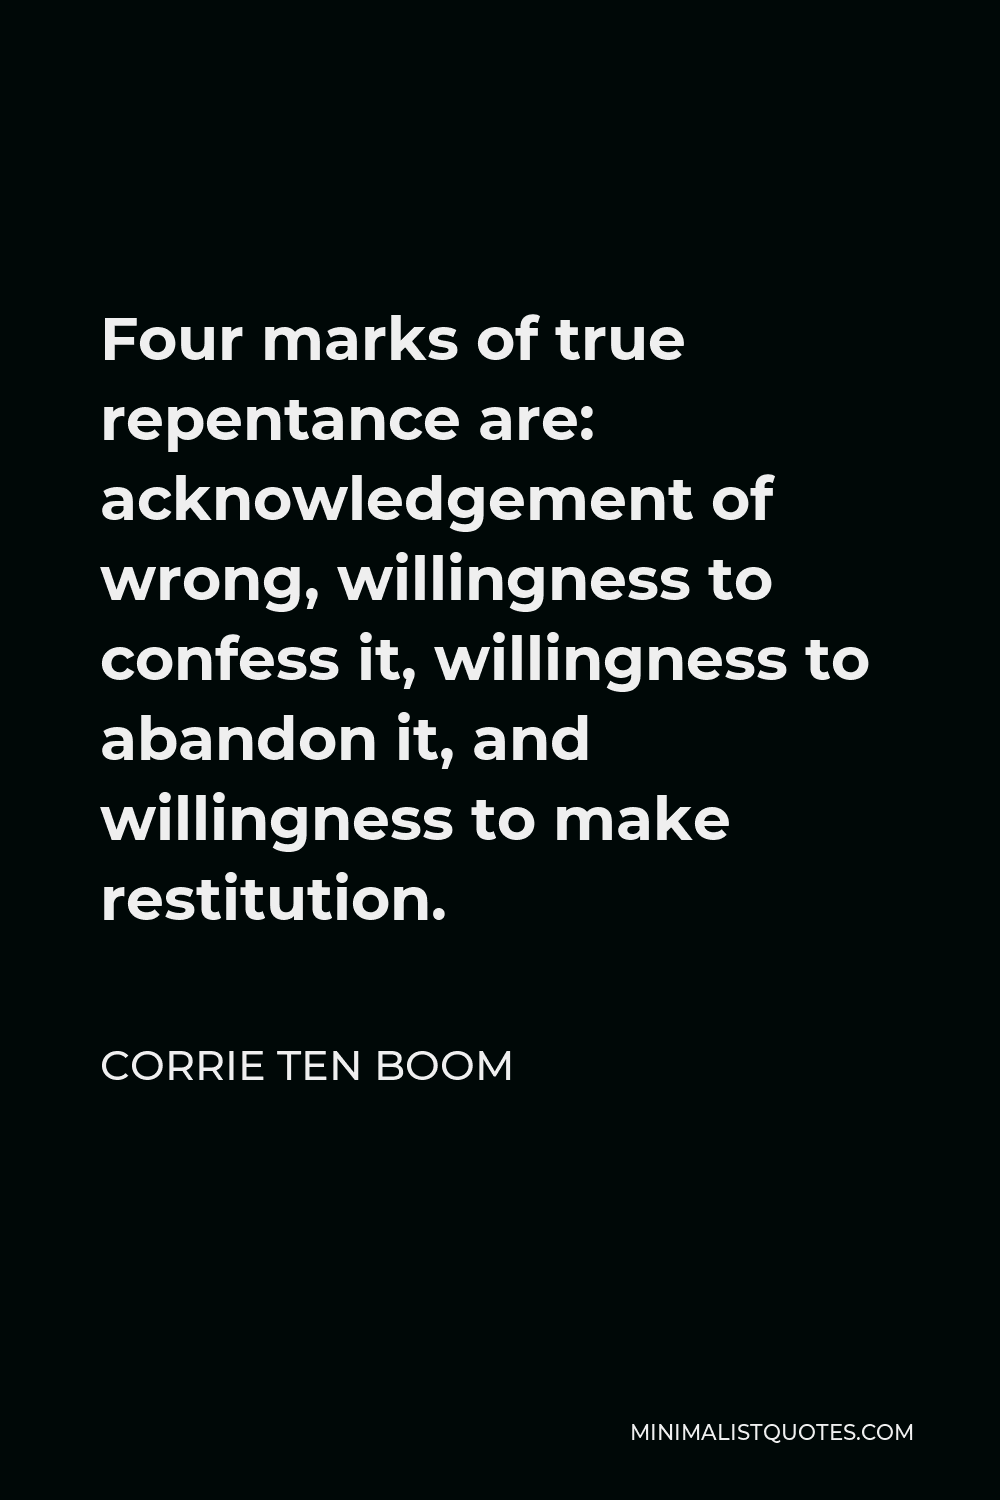 Corrie ten Boom Quote - Four marks of true repentance are: acknowledgement of wrong, willingness to confess it, willingness to abandon it, and willingness to make restitution.